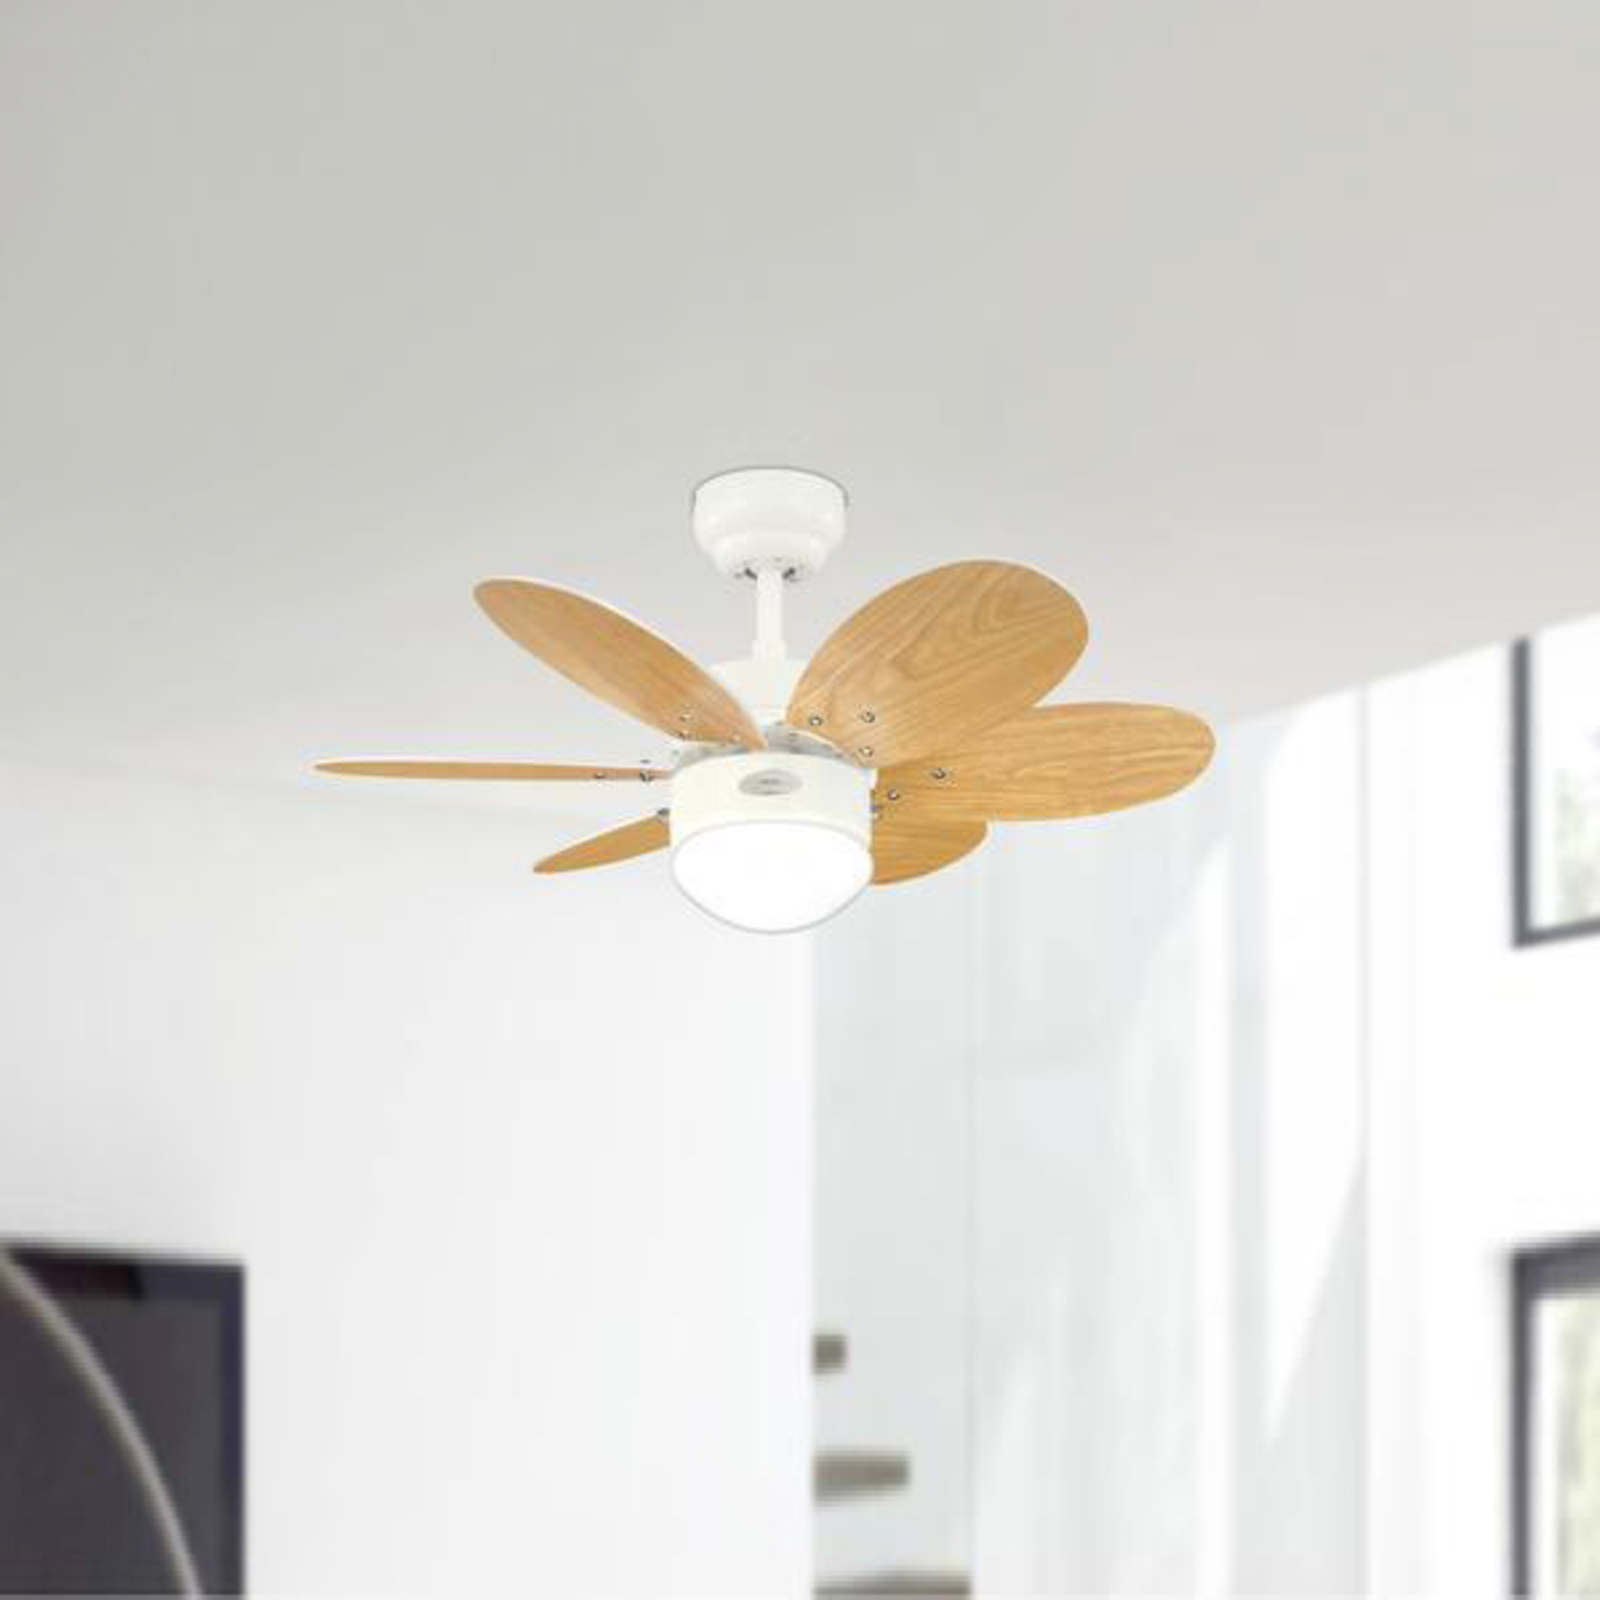 Westinghouse Turbo II fan with 2 sets of blades